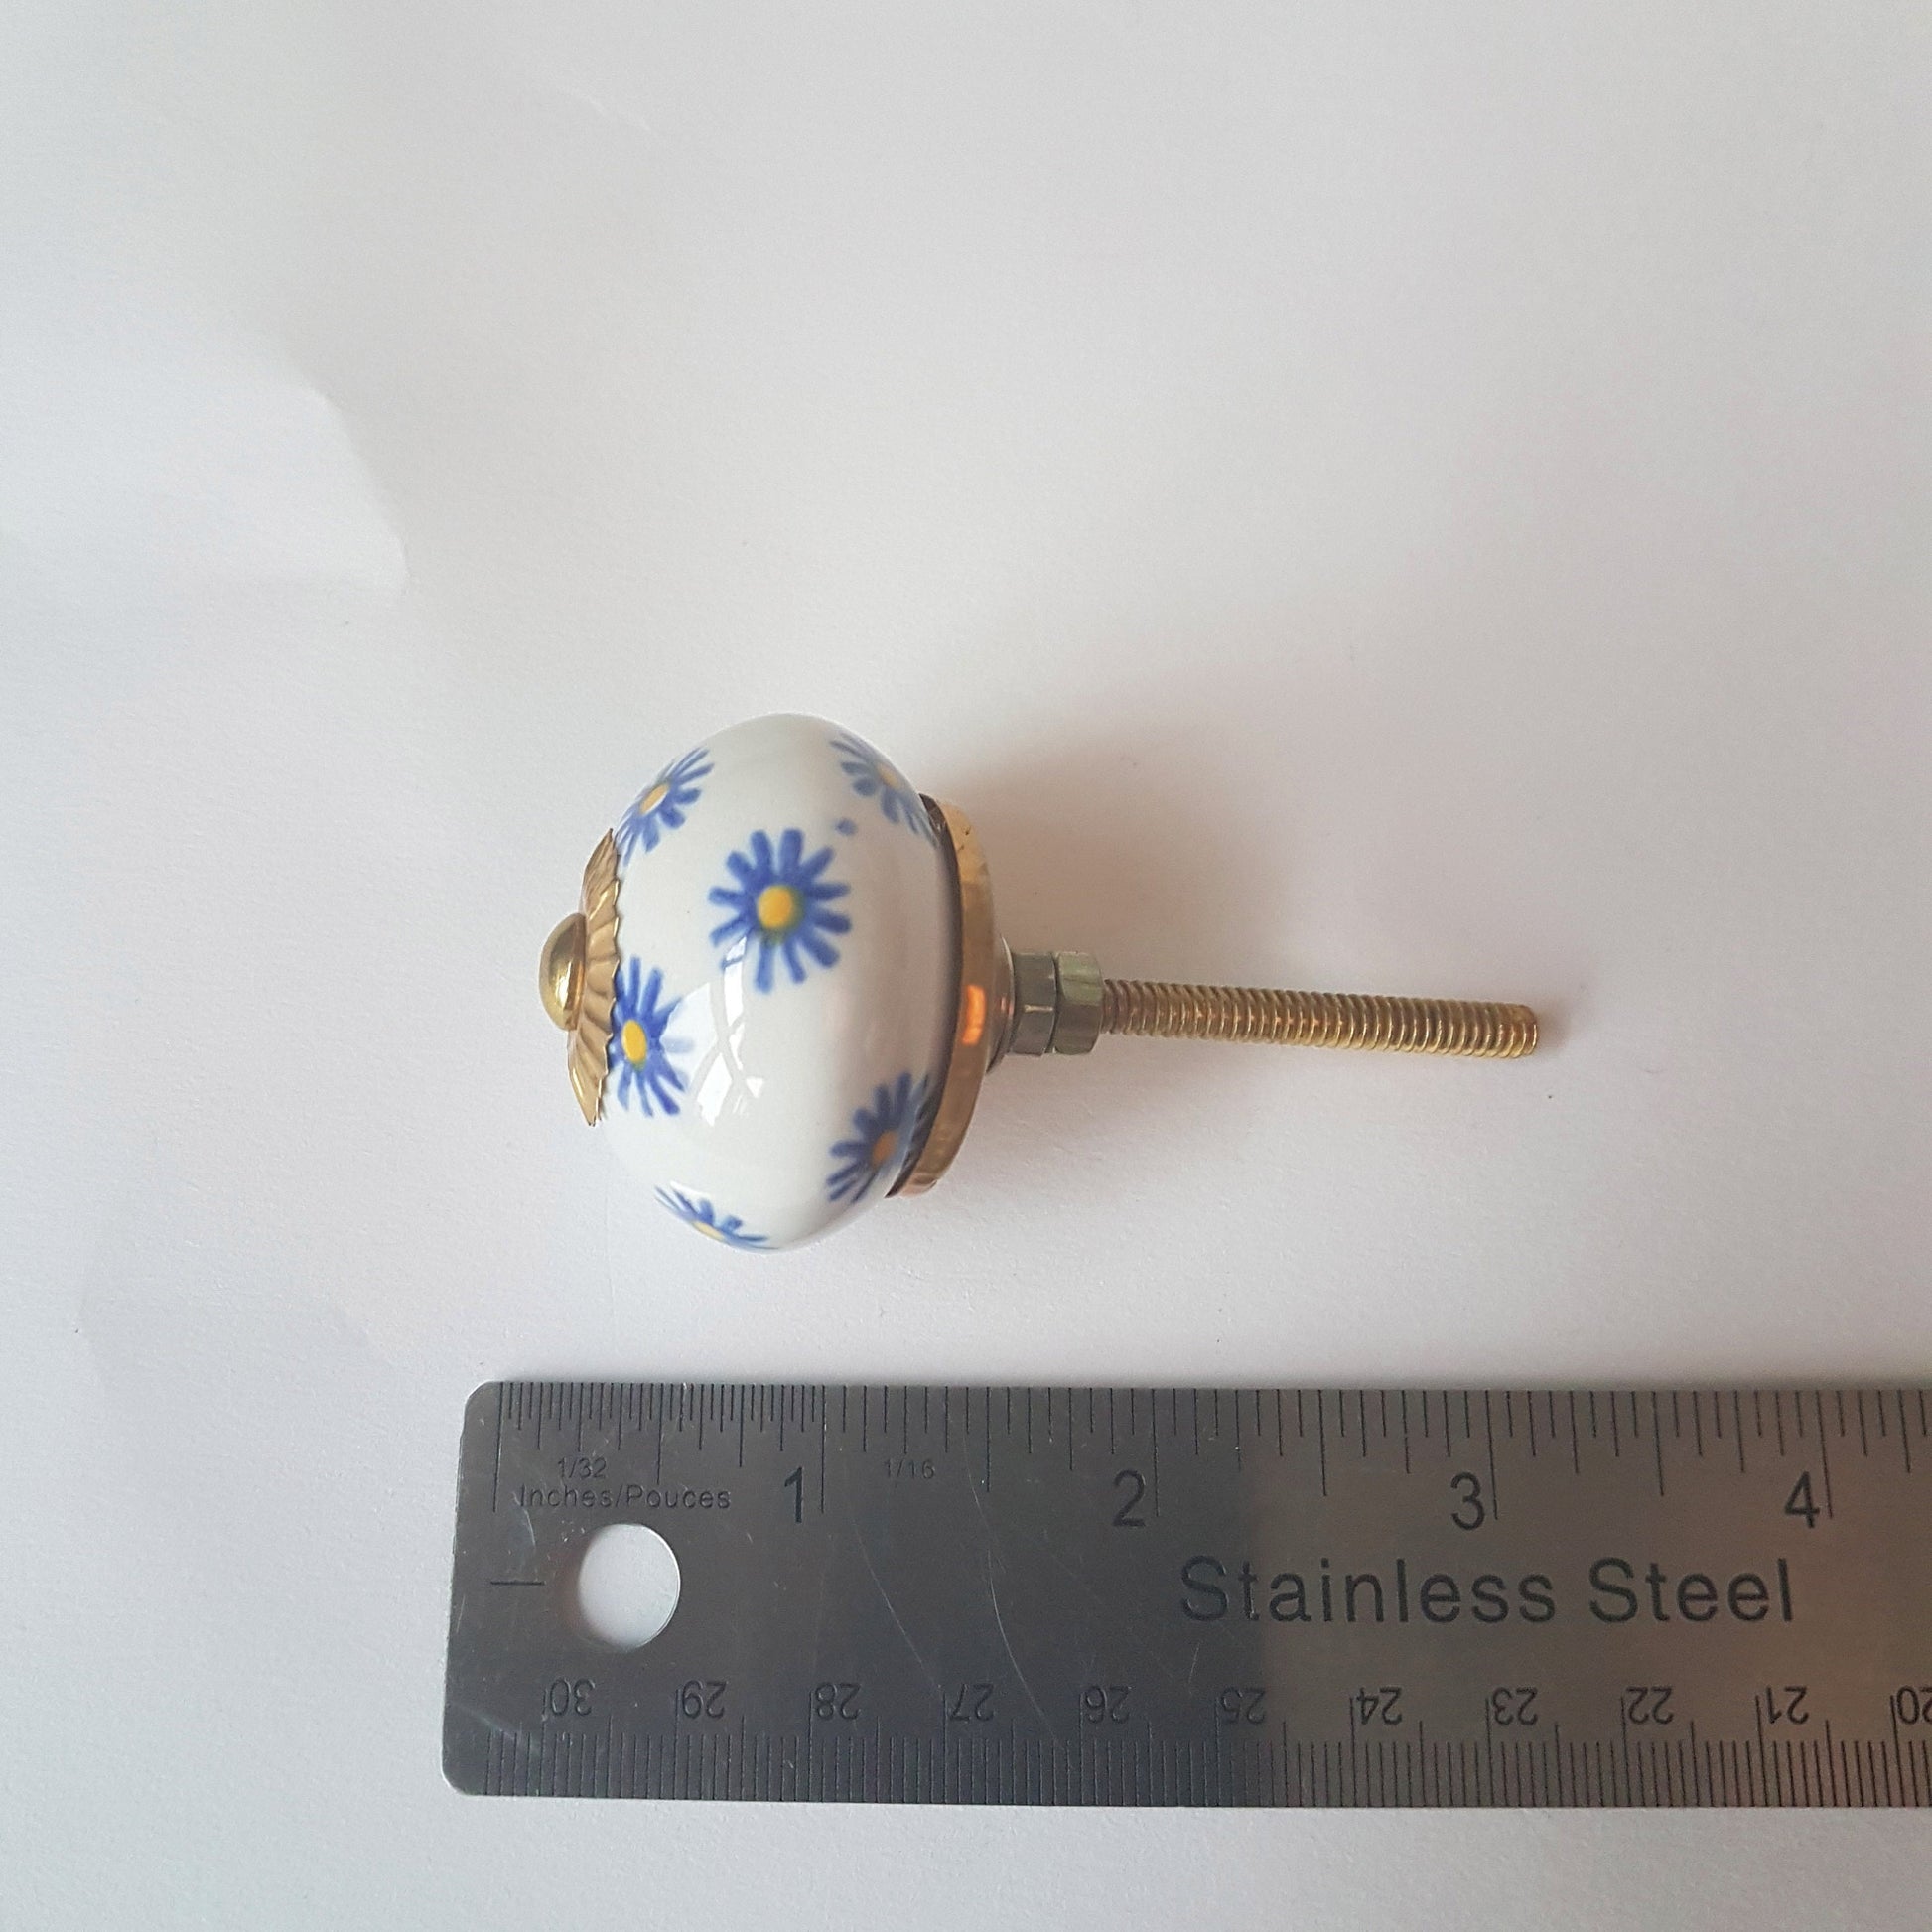 Set of 18 Delft blue cupboard knobs, ceramic hand painted, for cabinets, furniture and home decorating. 18 piece set of knob/drawer pulls. - Vintage India Ca